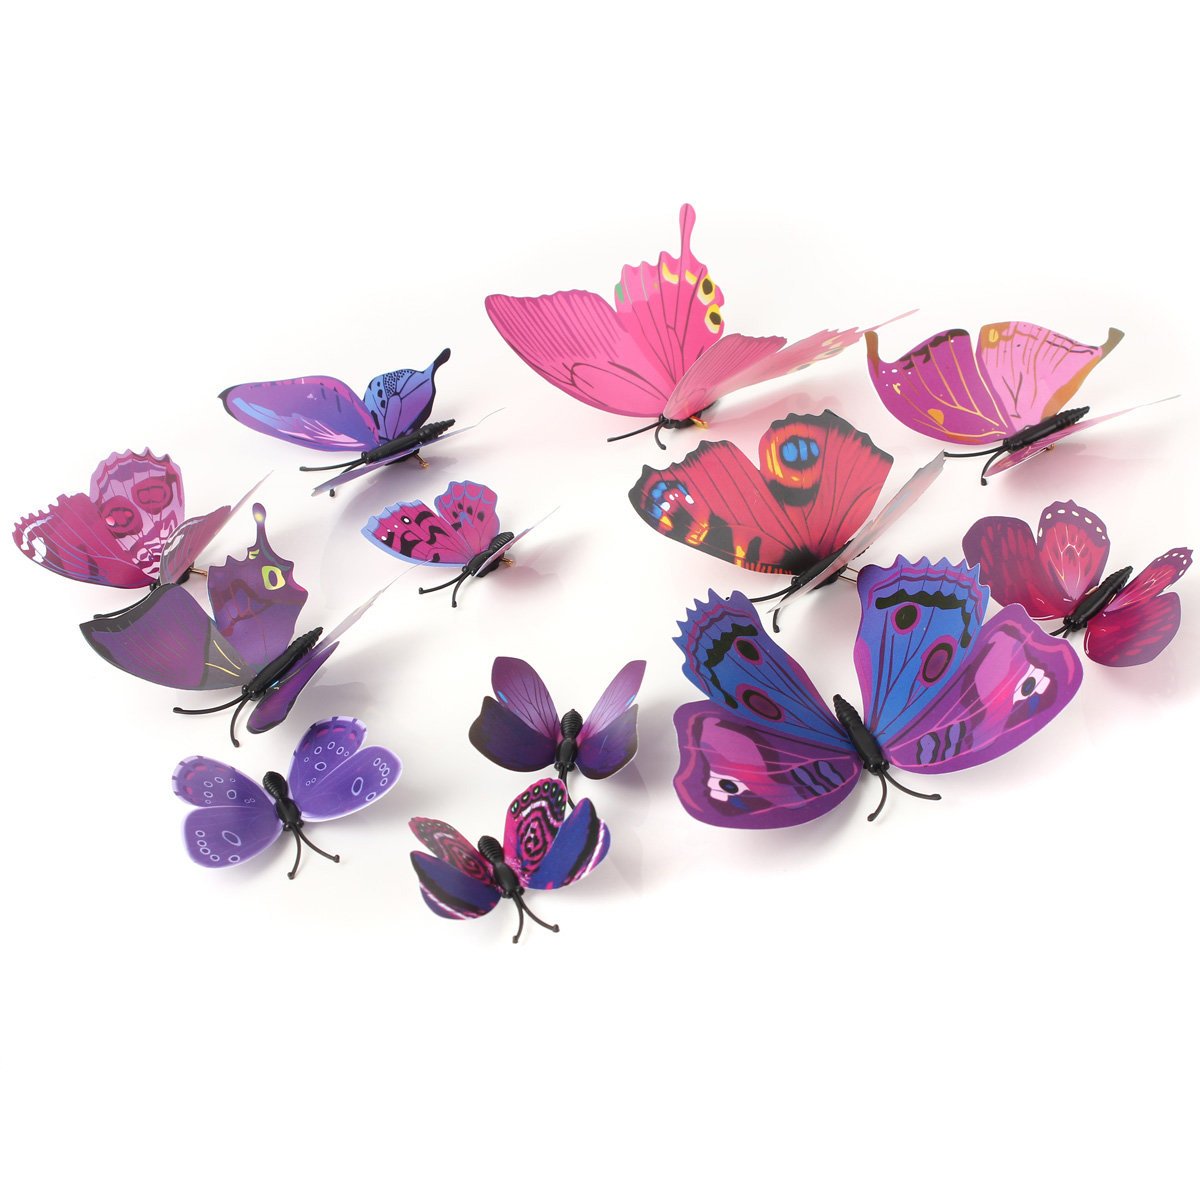 Butterfly India Home Decorative 3D Butterfly with Sticking Pads Office Deco Set of 12 Pcs 